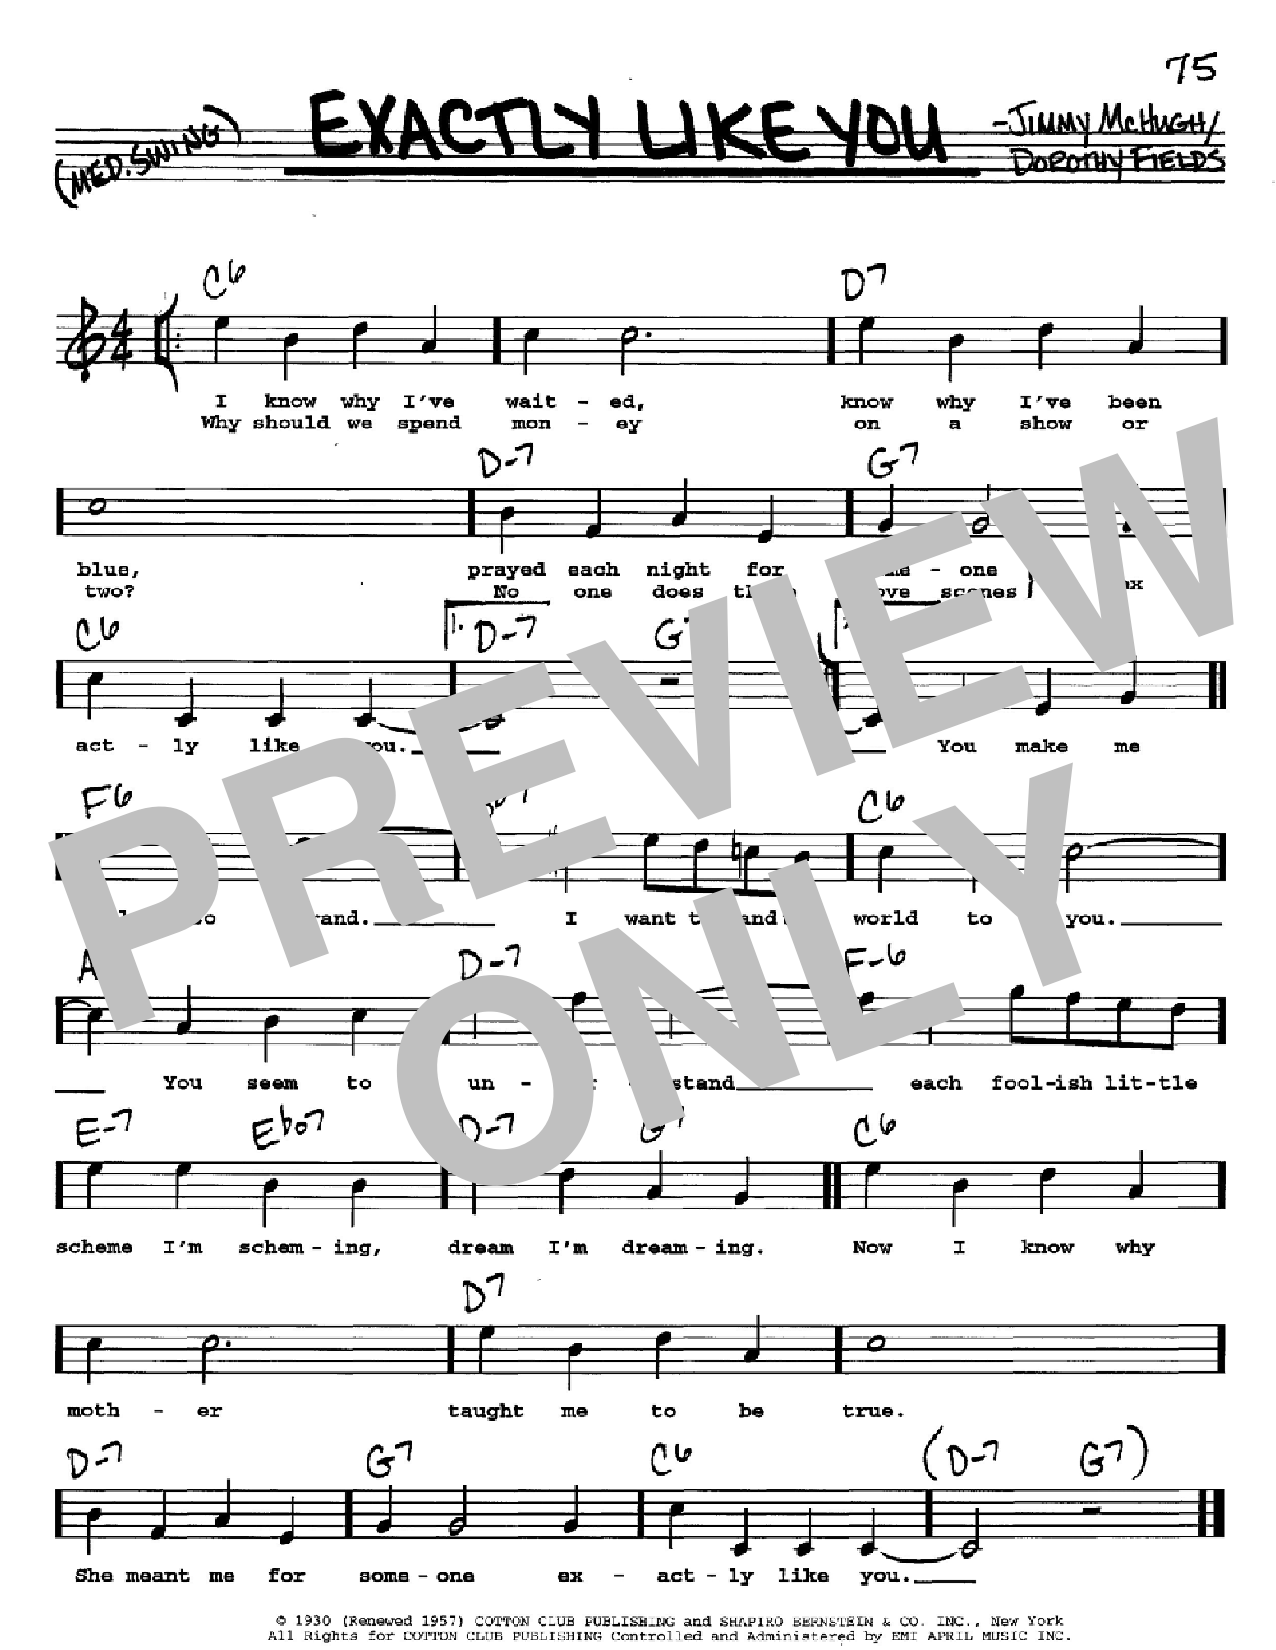 Download Dorothy Fields Exactly Like You Sheet Music